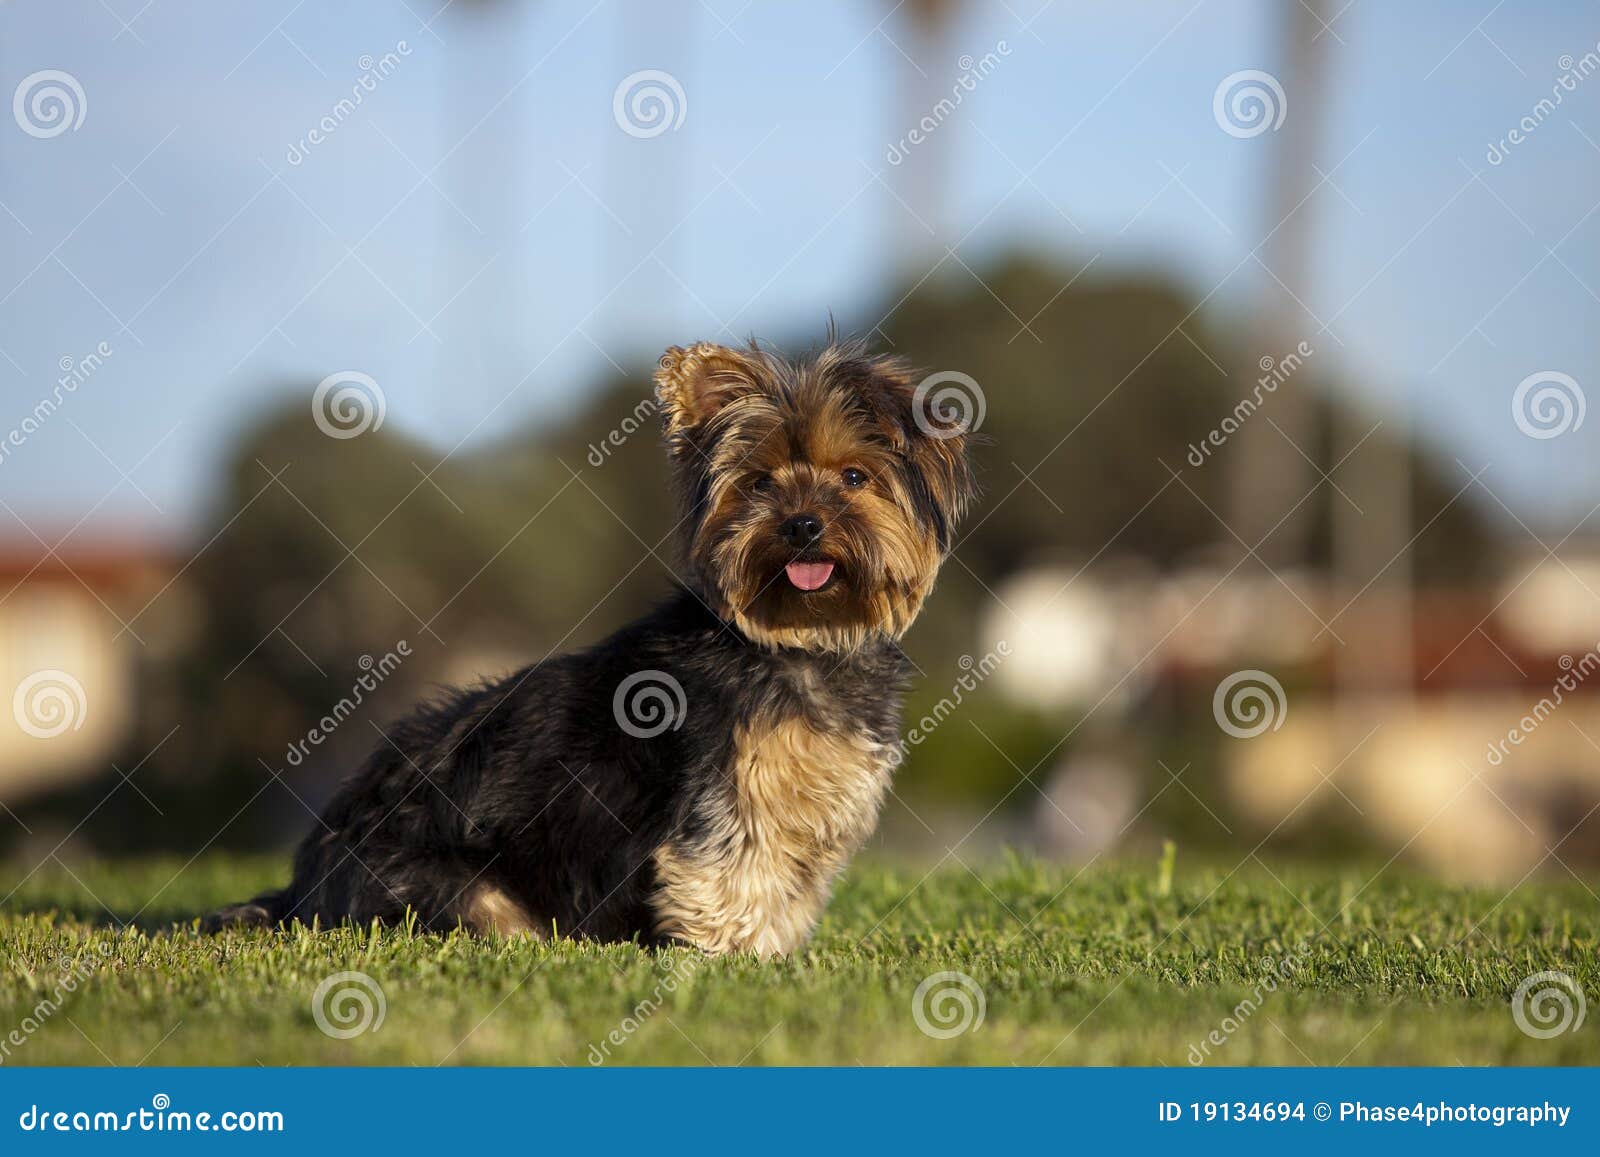 Puppy in grass stock photo. Image of summer, horizontal - 19134694